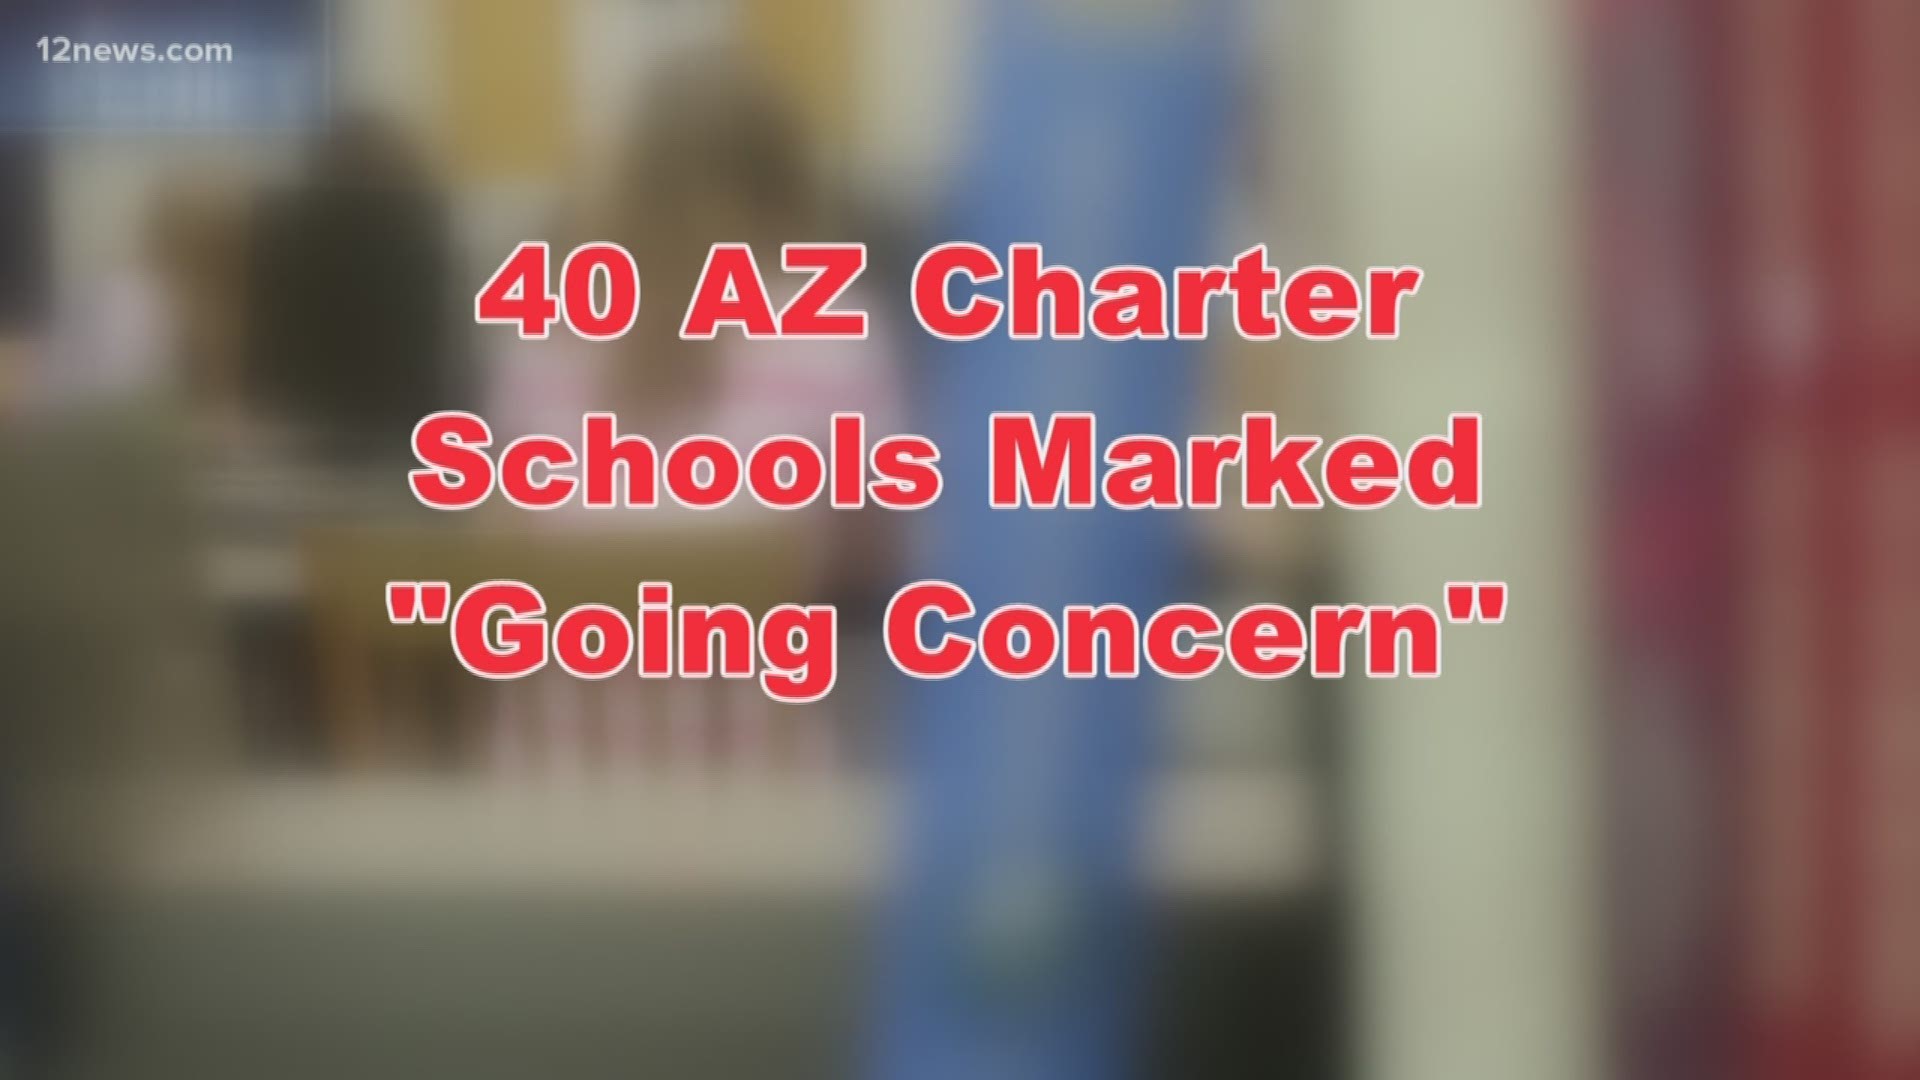 Parents need to pay attention to their children's school finances. 40 Arizona Charter Schools are not financially stable.